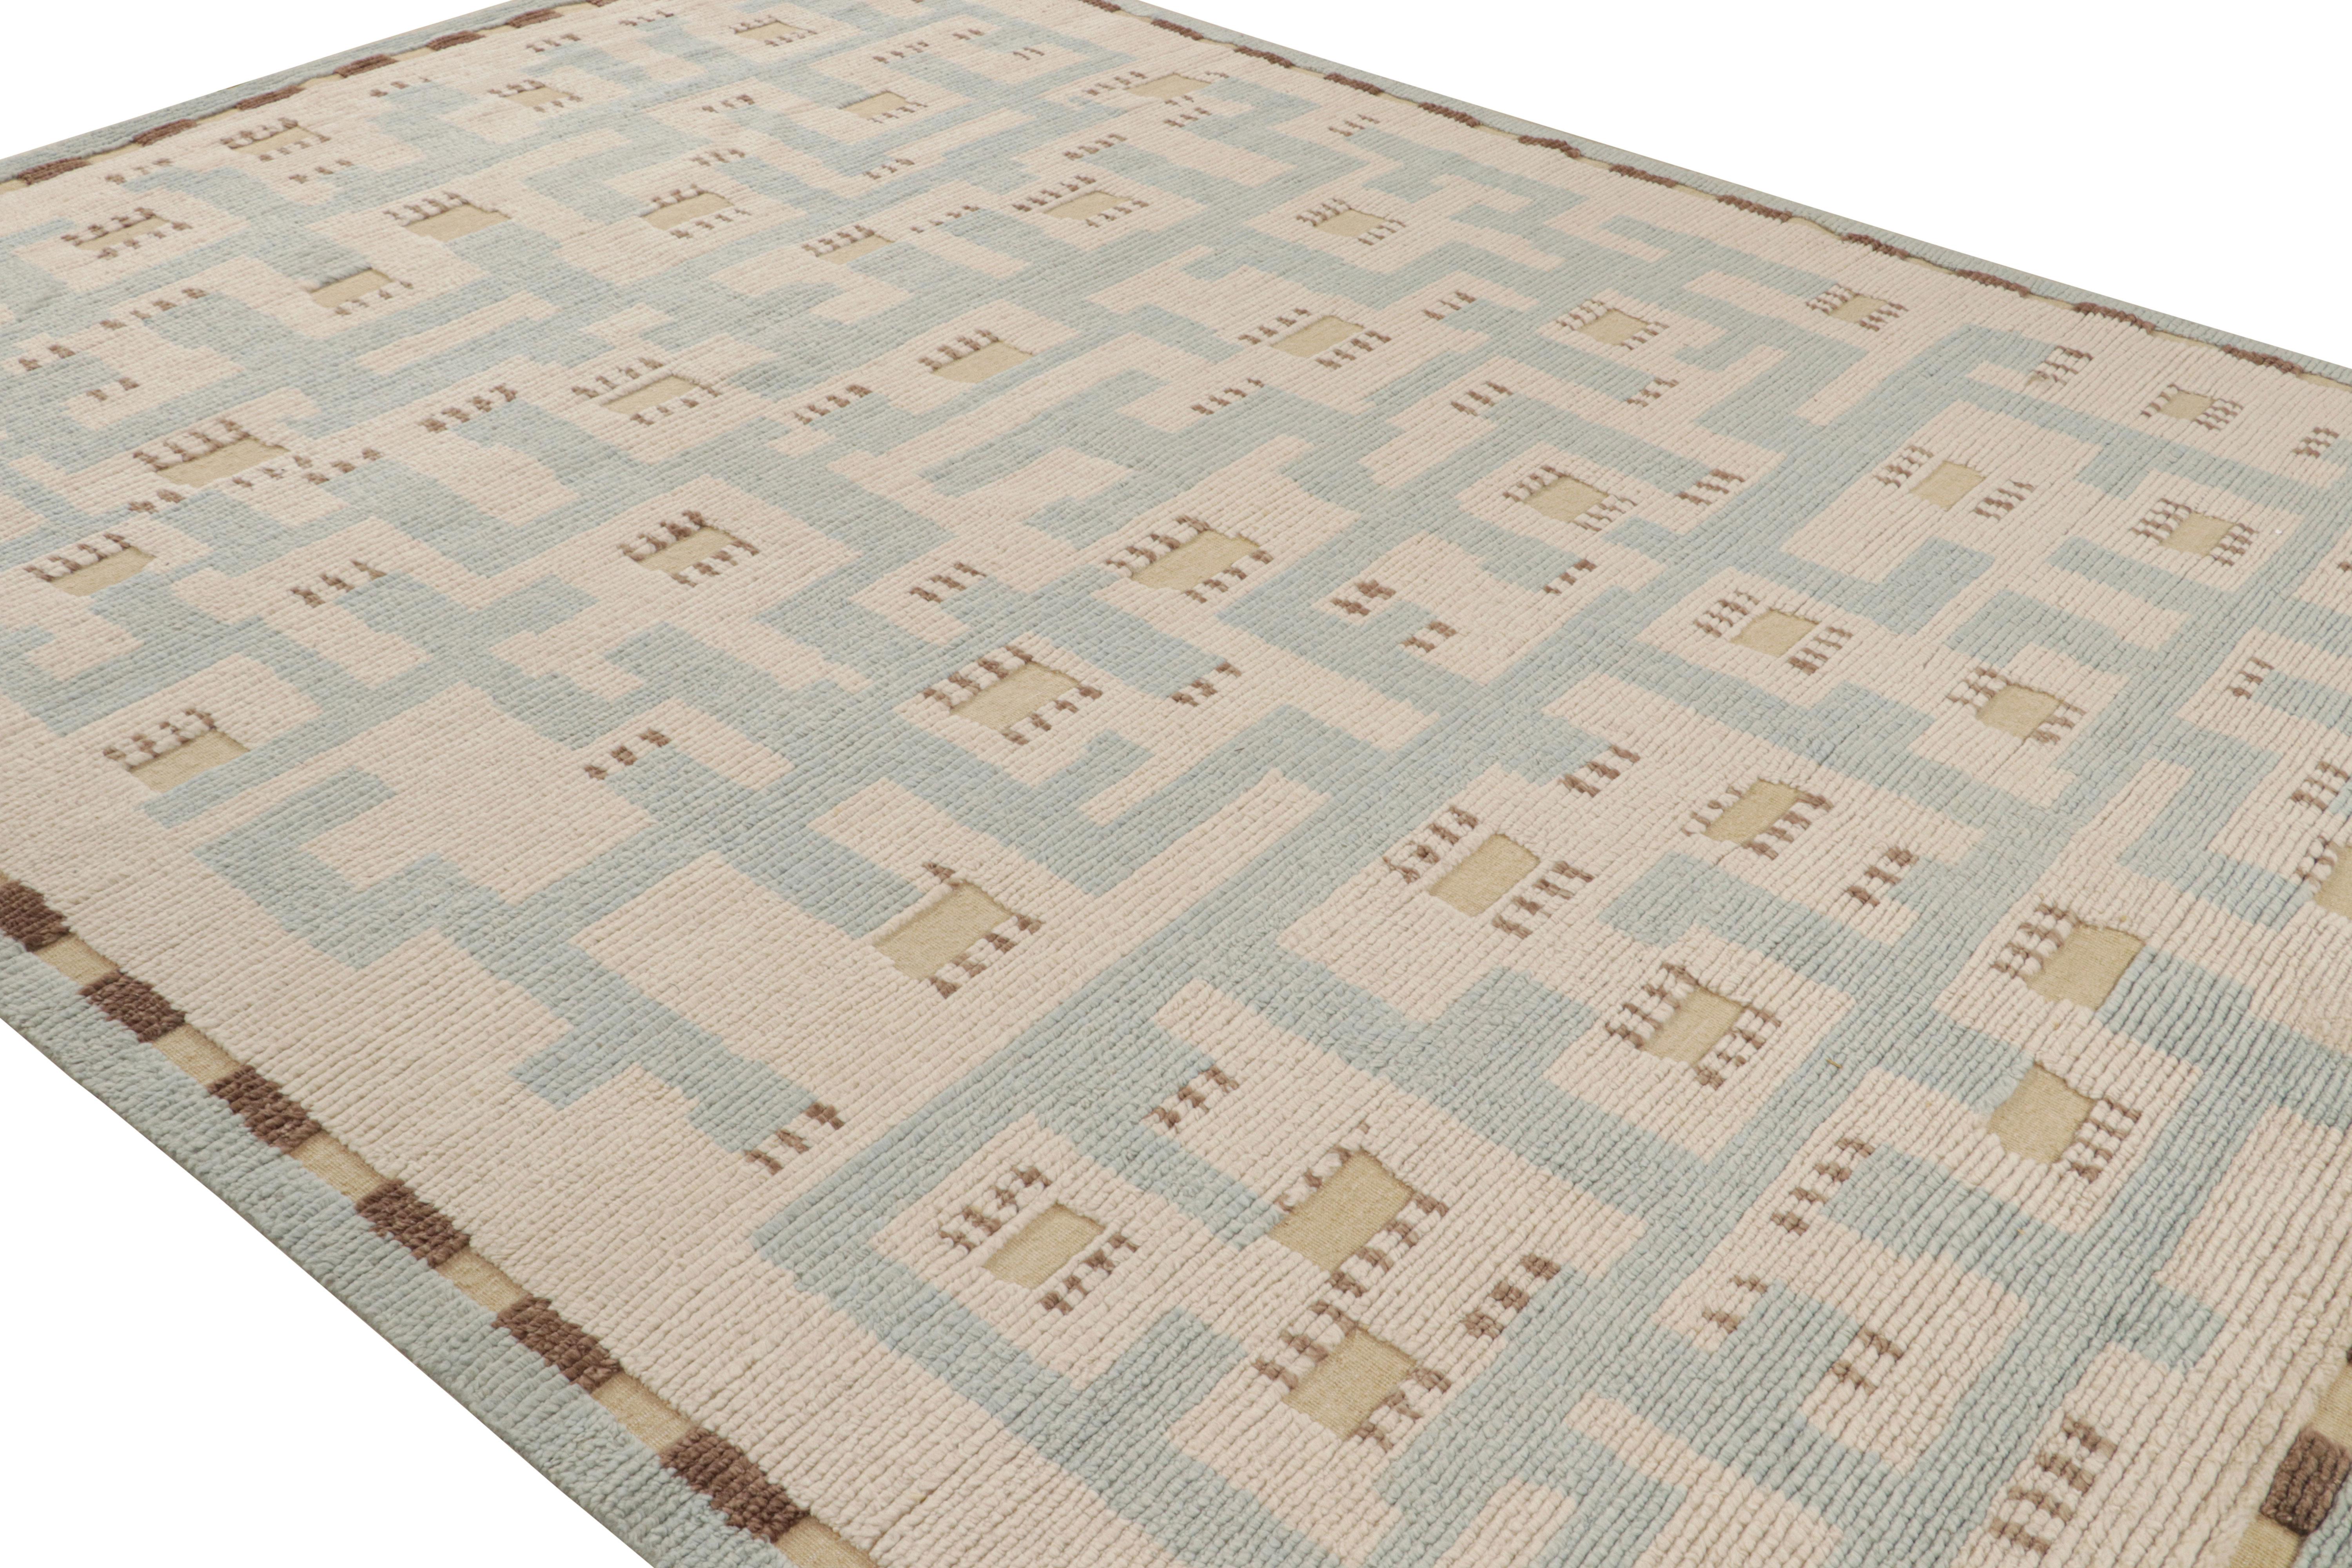 Hand-knotted in wool, this 9x12 Scandinavian rug is a latest addition to our “High” texture, known for its high-low addition. 

On the design: 

Admirers of the craft and keen eyes will note the marriage of high-low texture to the geometry and its